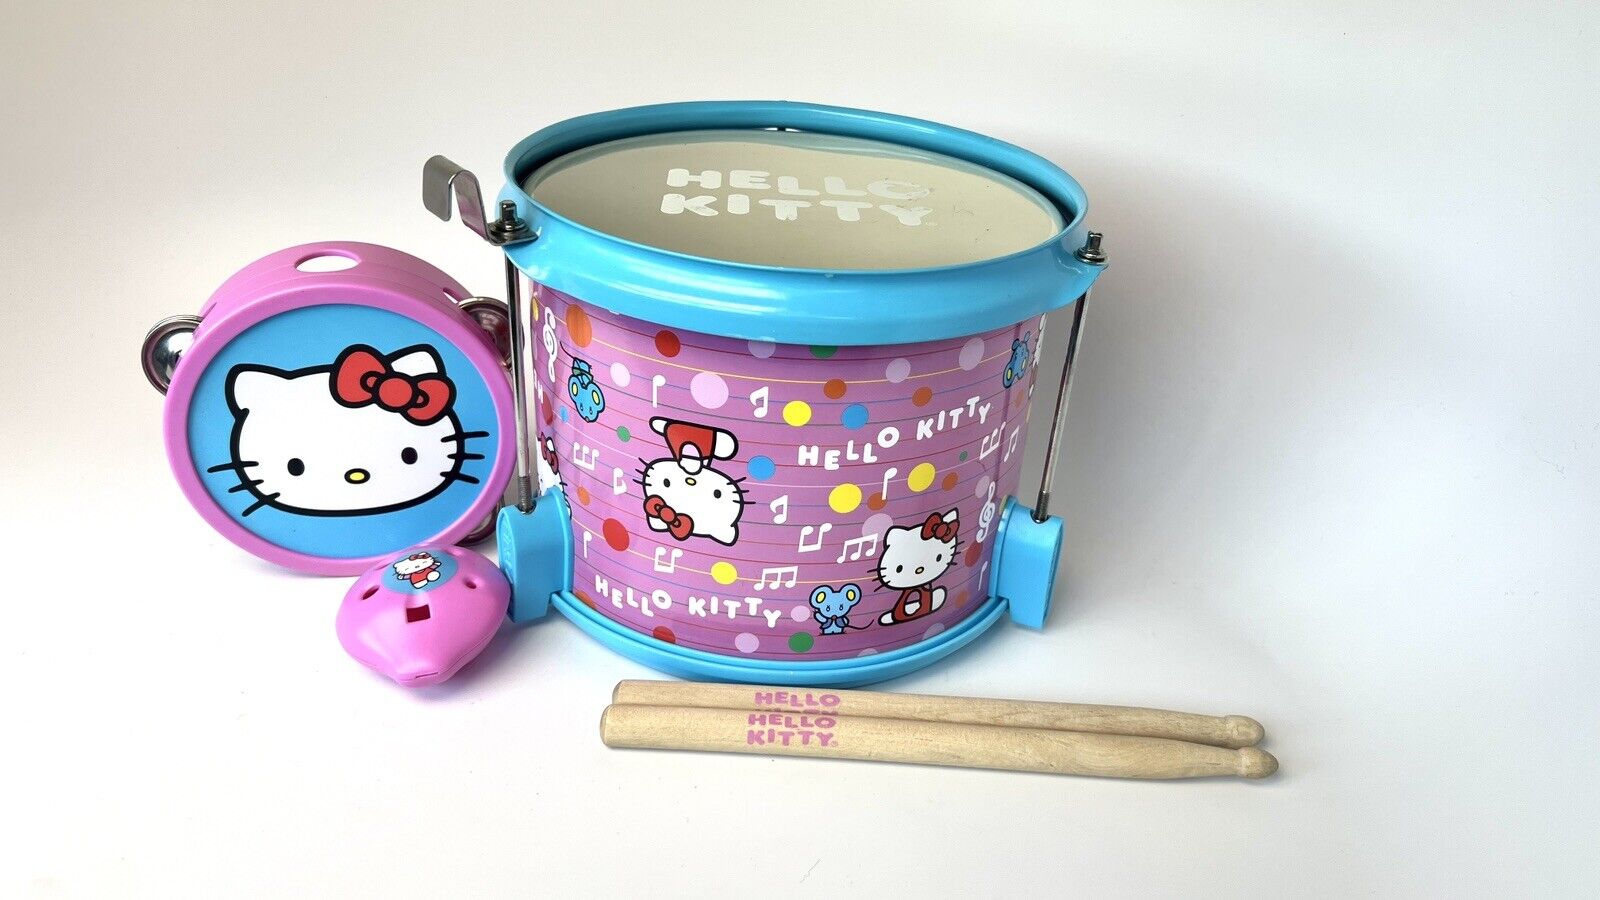 Hello Kitty First Act Fun In A Drum With Tambourine, Whistle, Drum, And Sticks